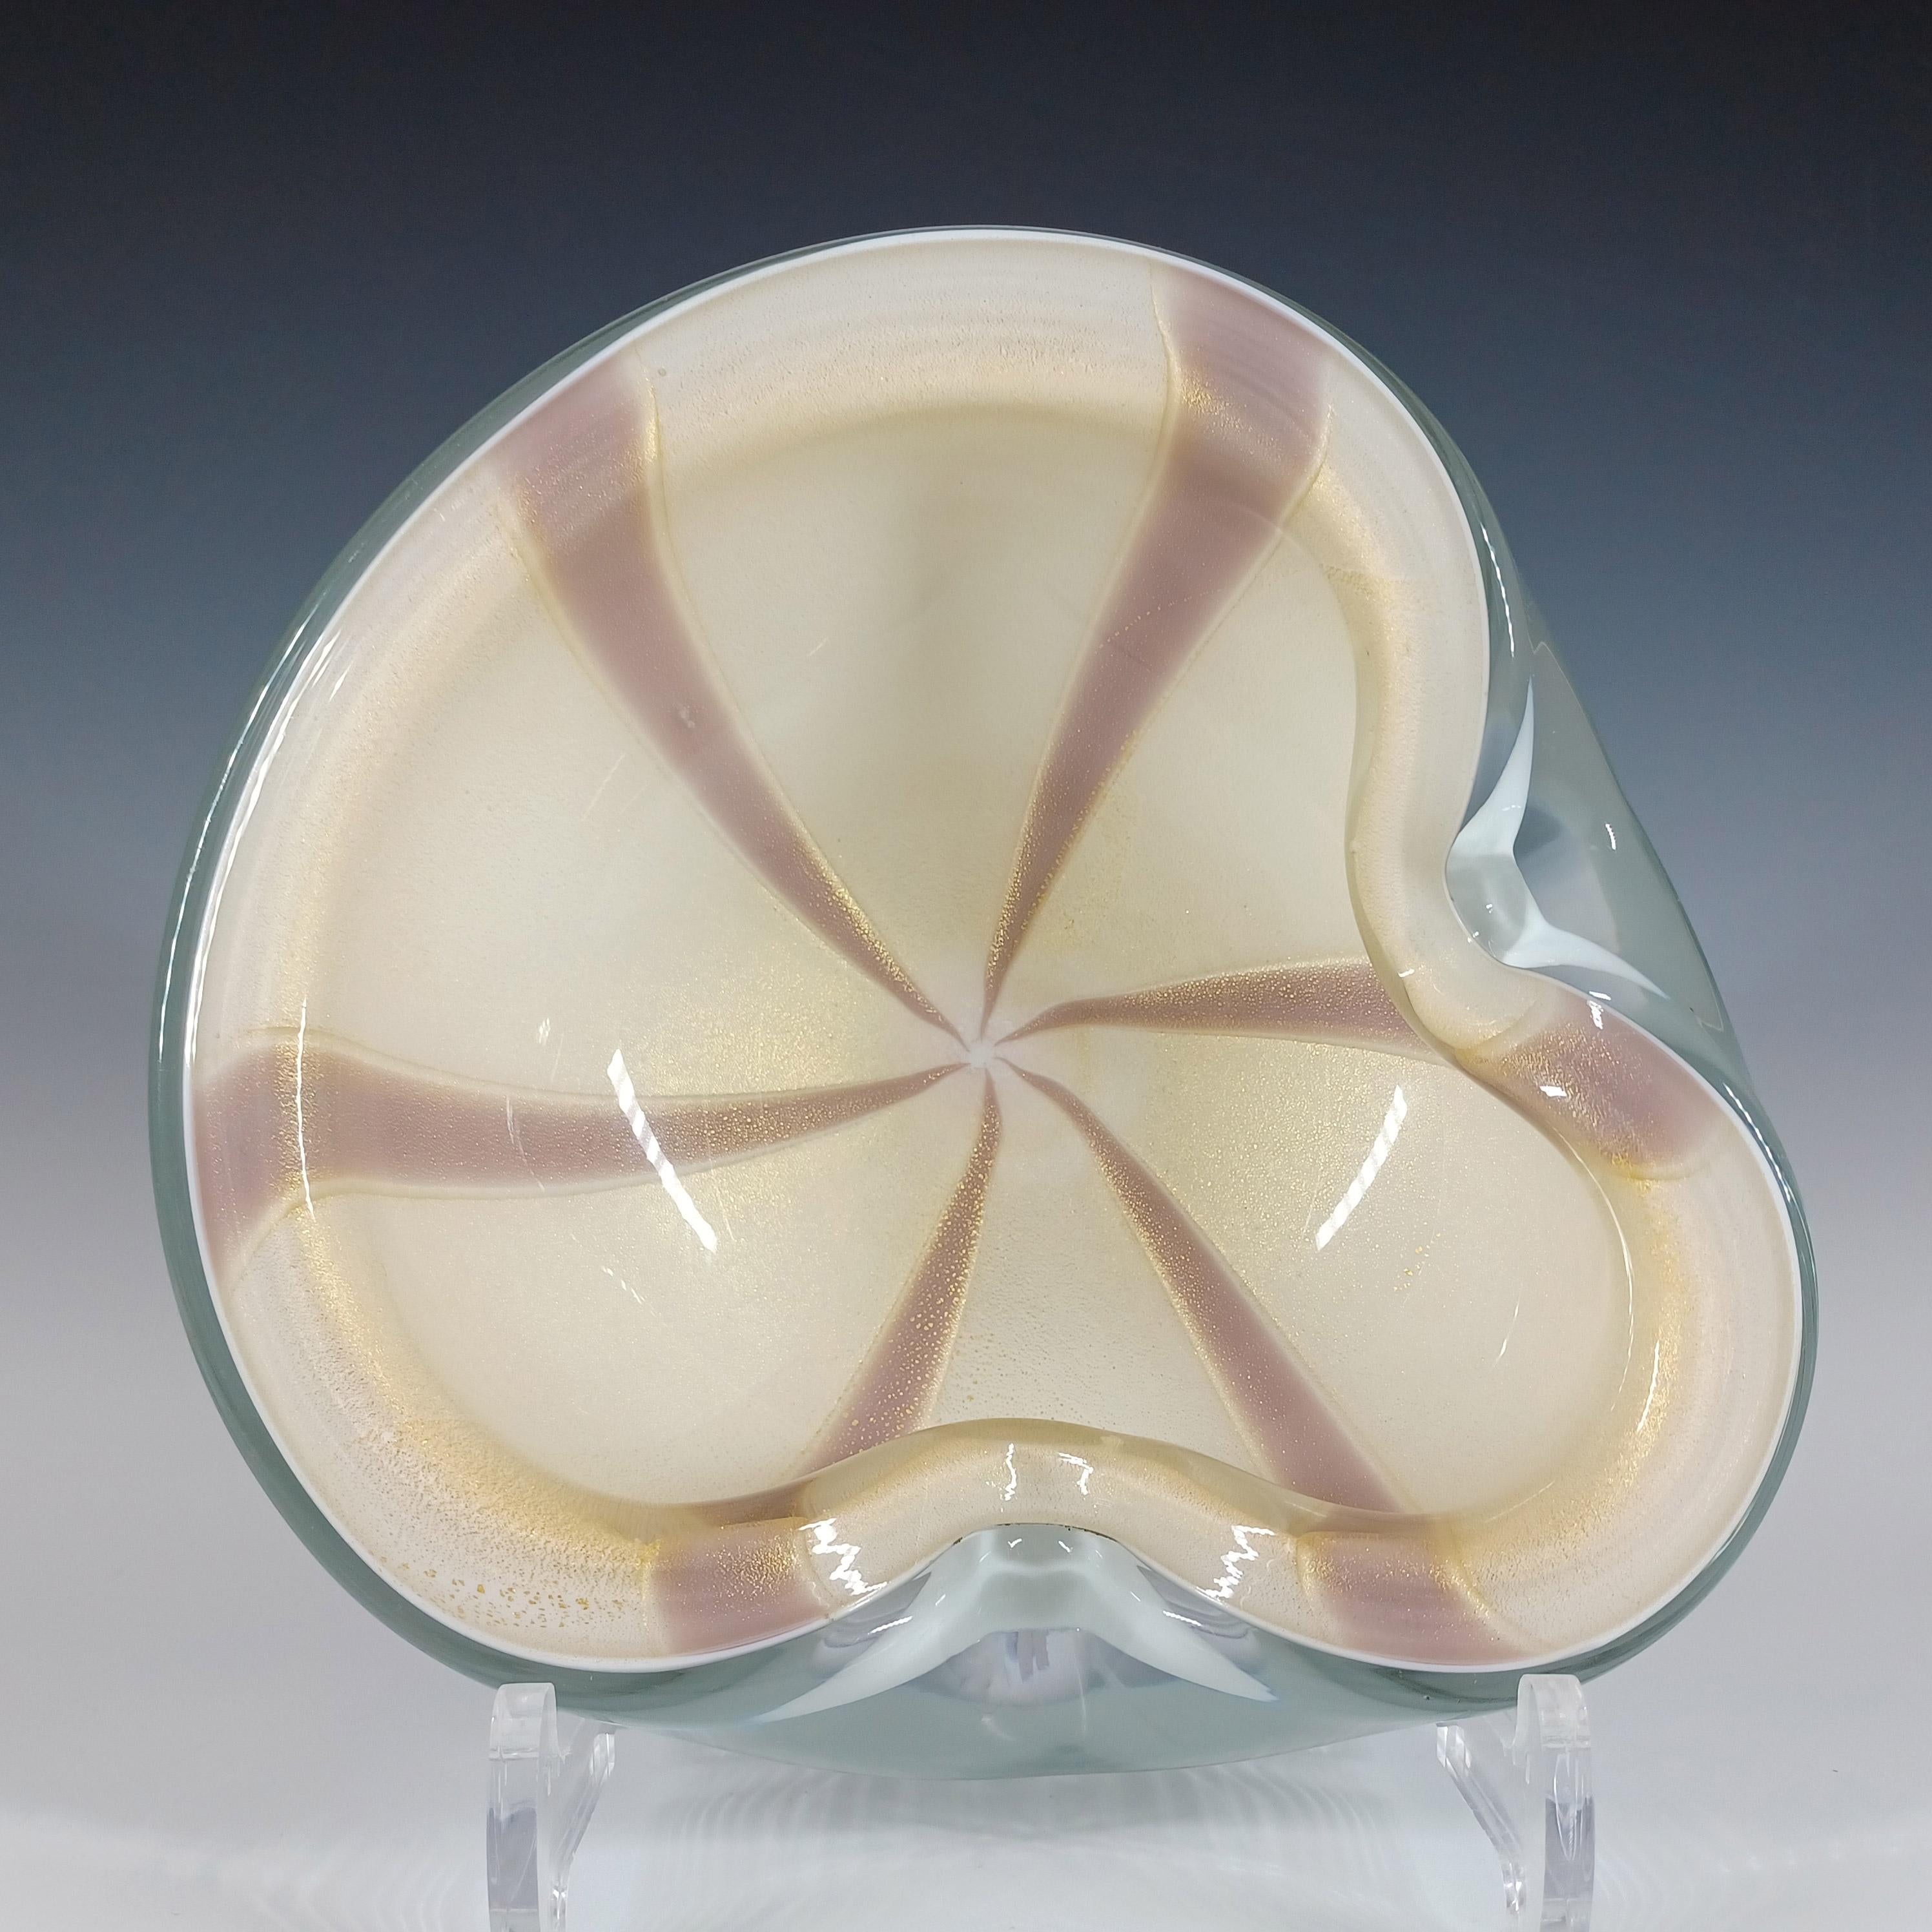 Here is a wonderful large and heavy 1950/60's Venetian freeform biomorphic glass 